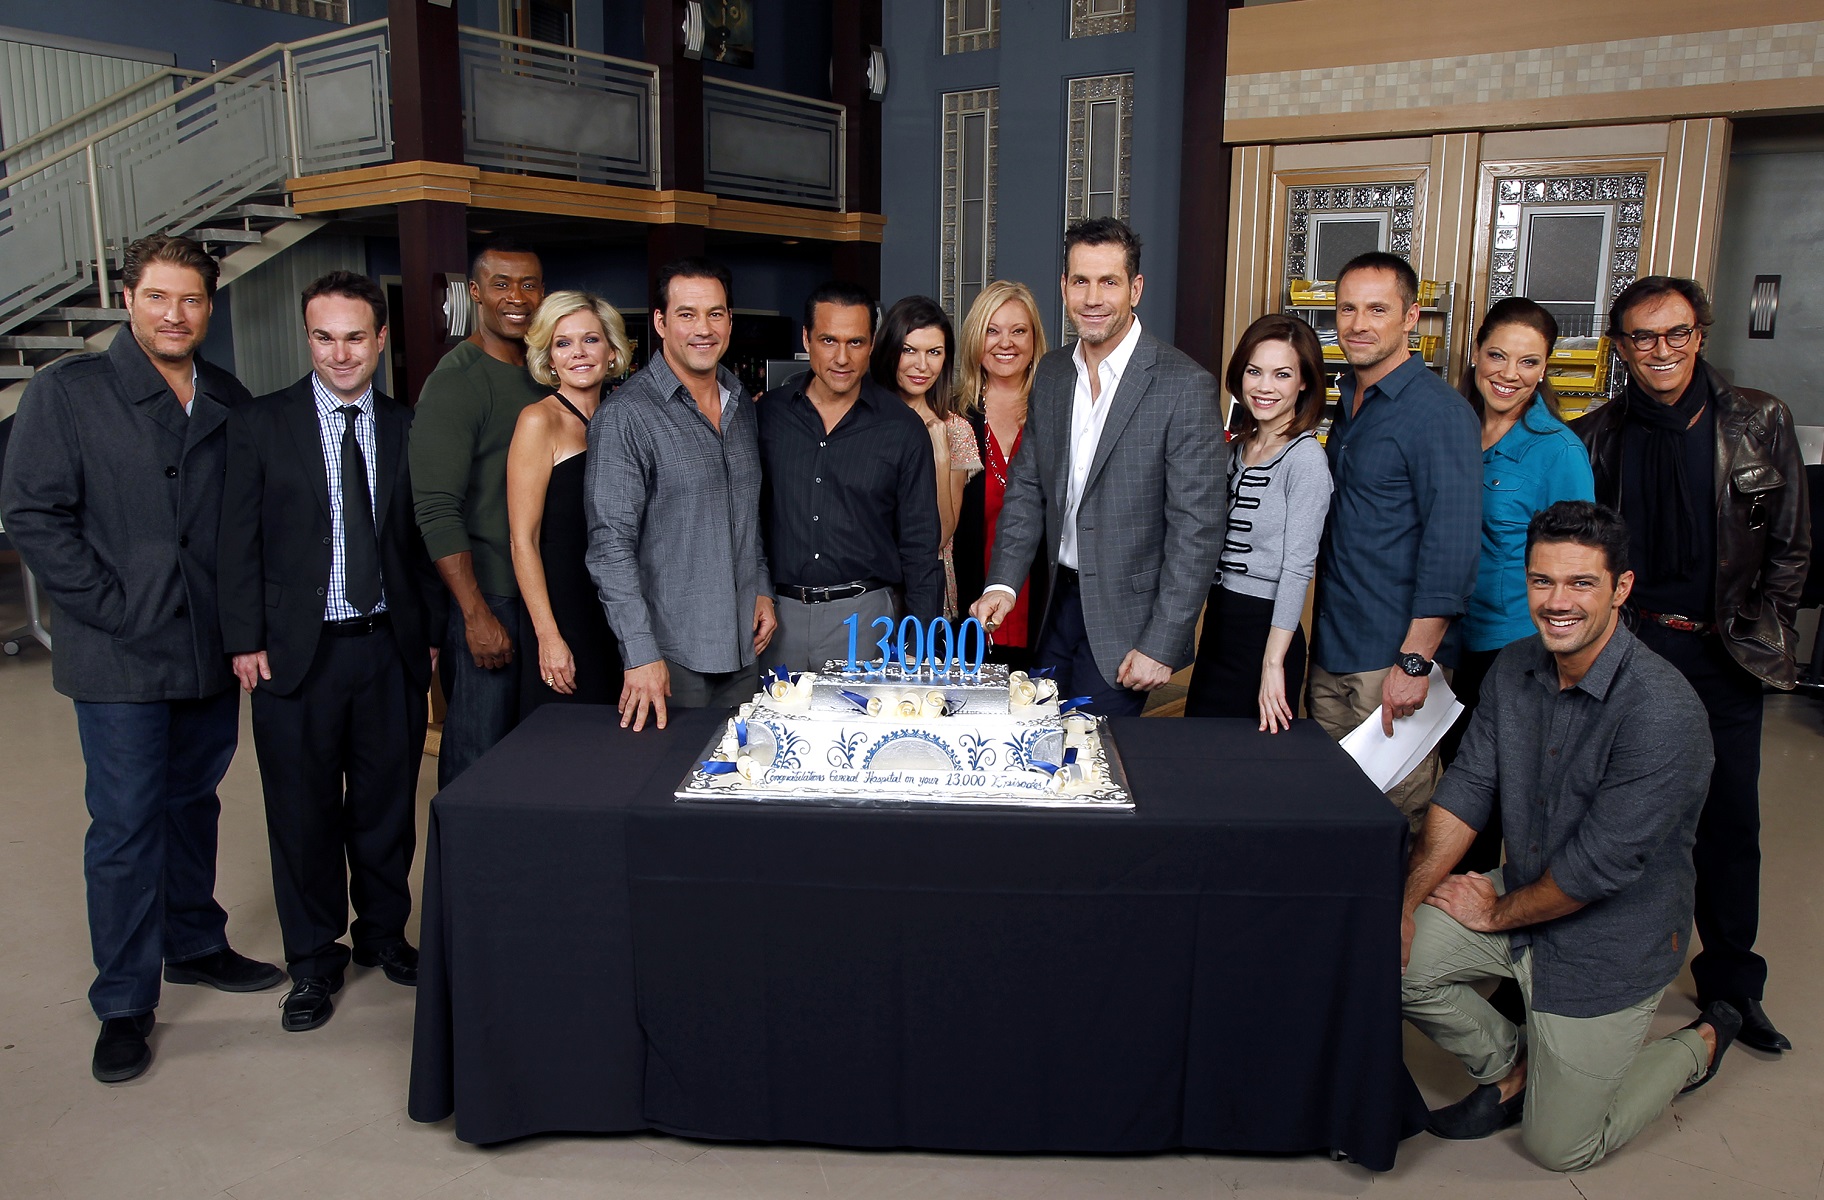 The cast of "General Hospital" celebrates its historic 13,000th episode with a cake-cutting ceremony